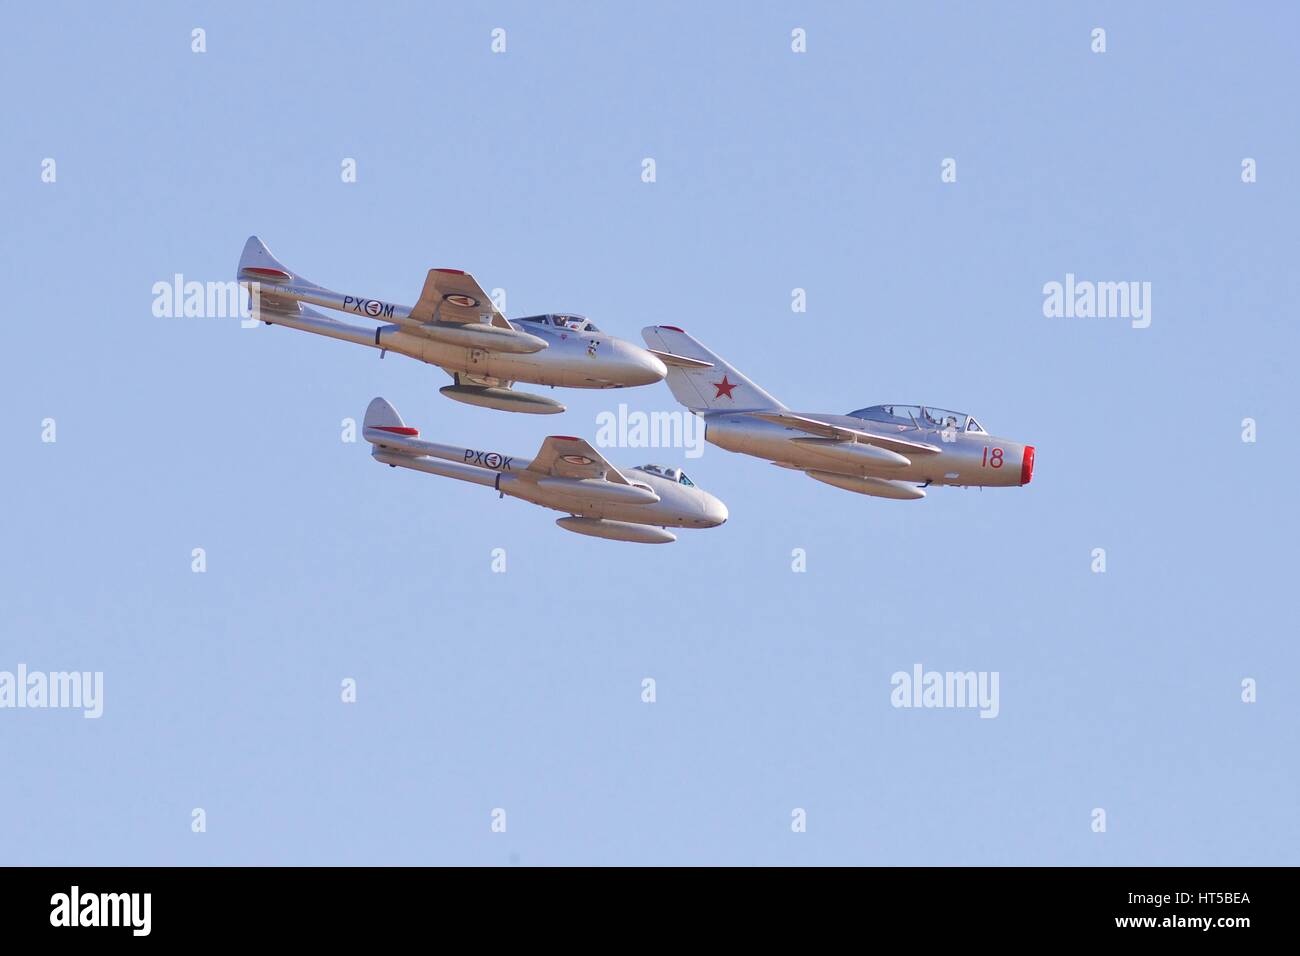 Mikoyan-Gurevich MiG-15, flying in formation with two De Havilland Vampire fighter jets Stock Photo